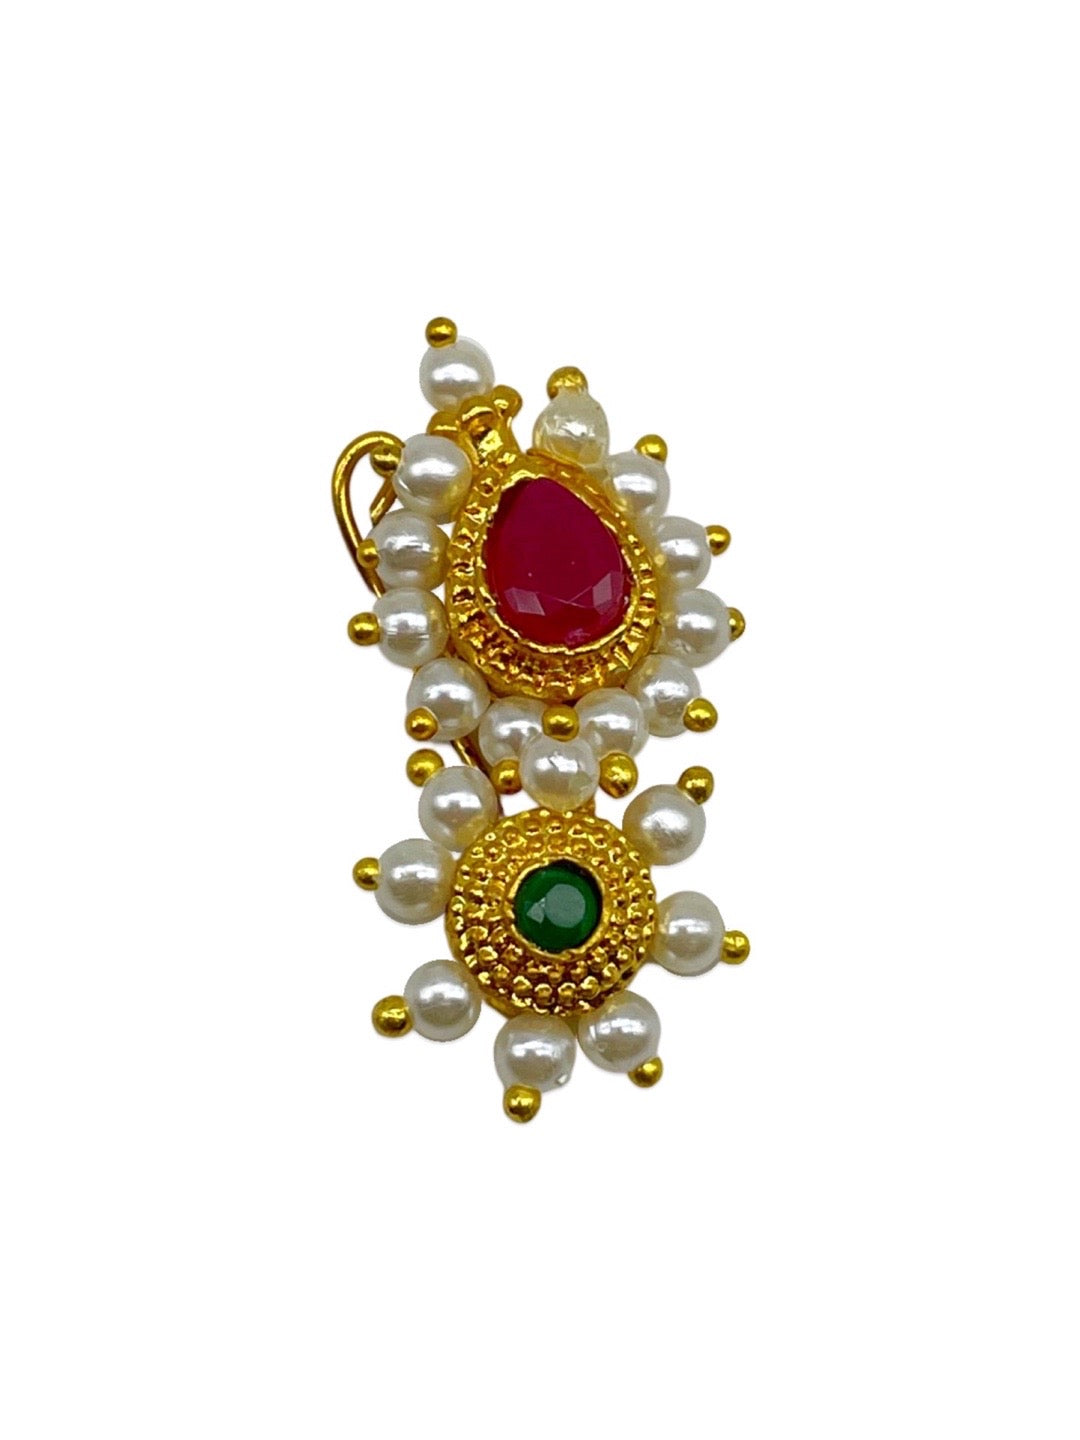 Traditional Maharashtrian Nose ring without piercing Pearl Gold Plated Nath  Clip | eBay